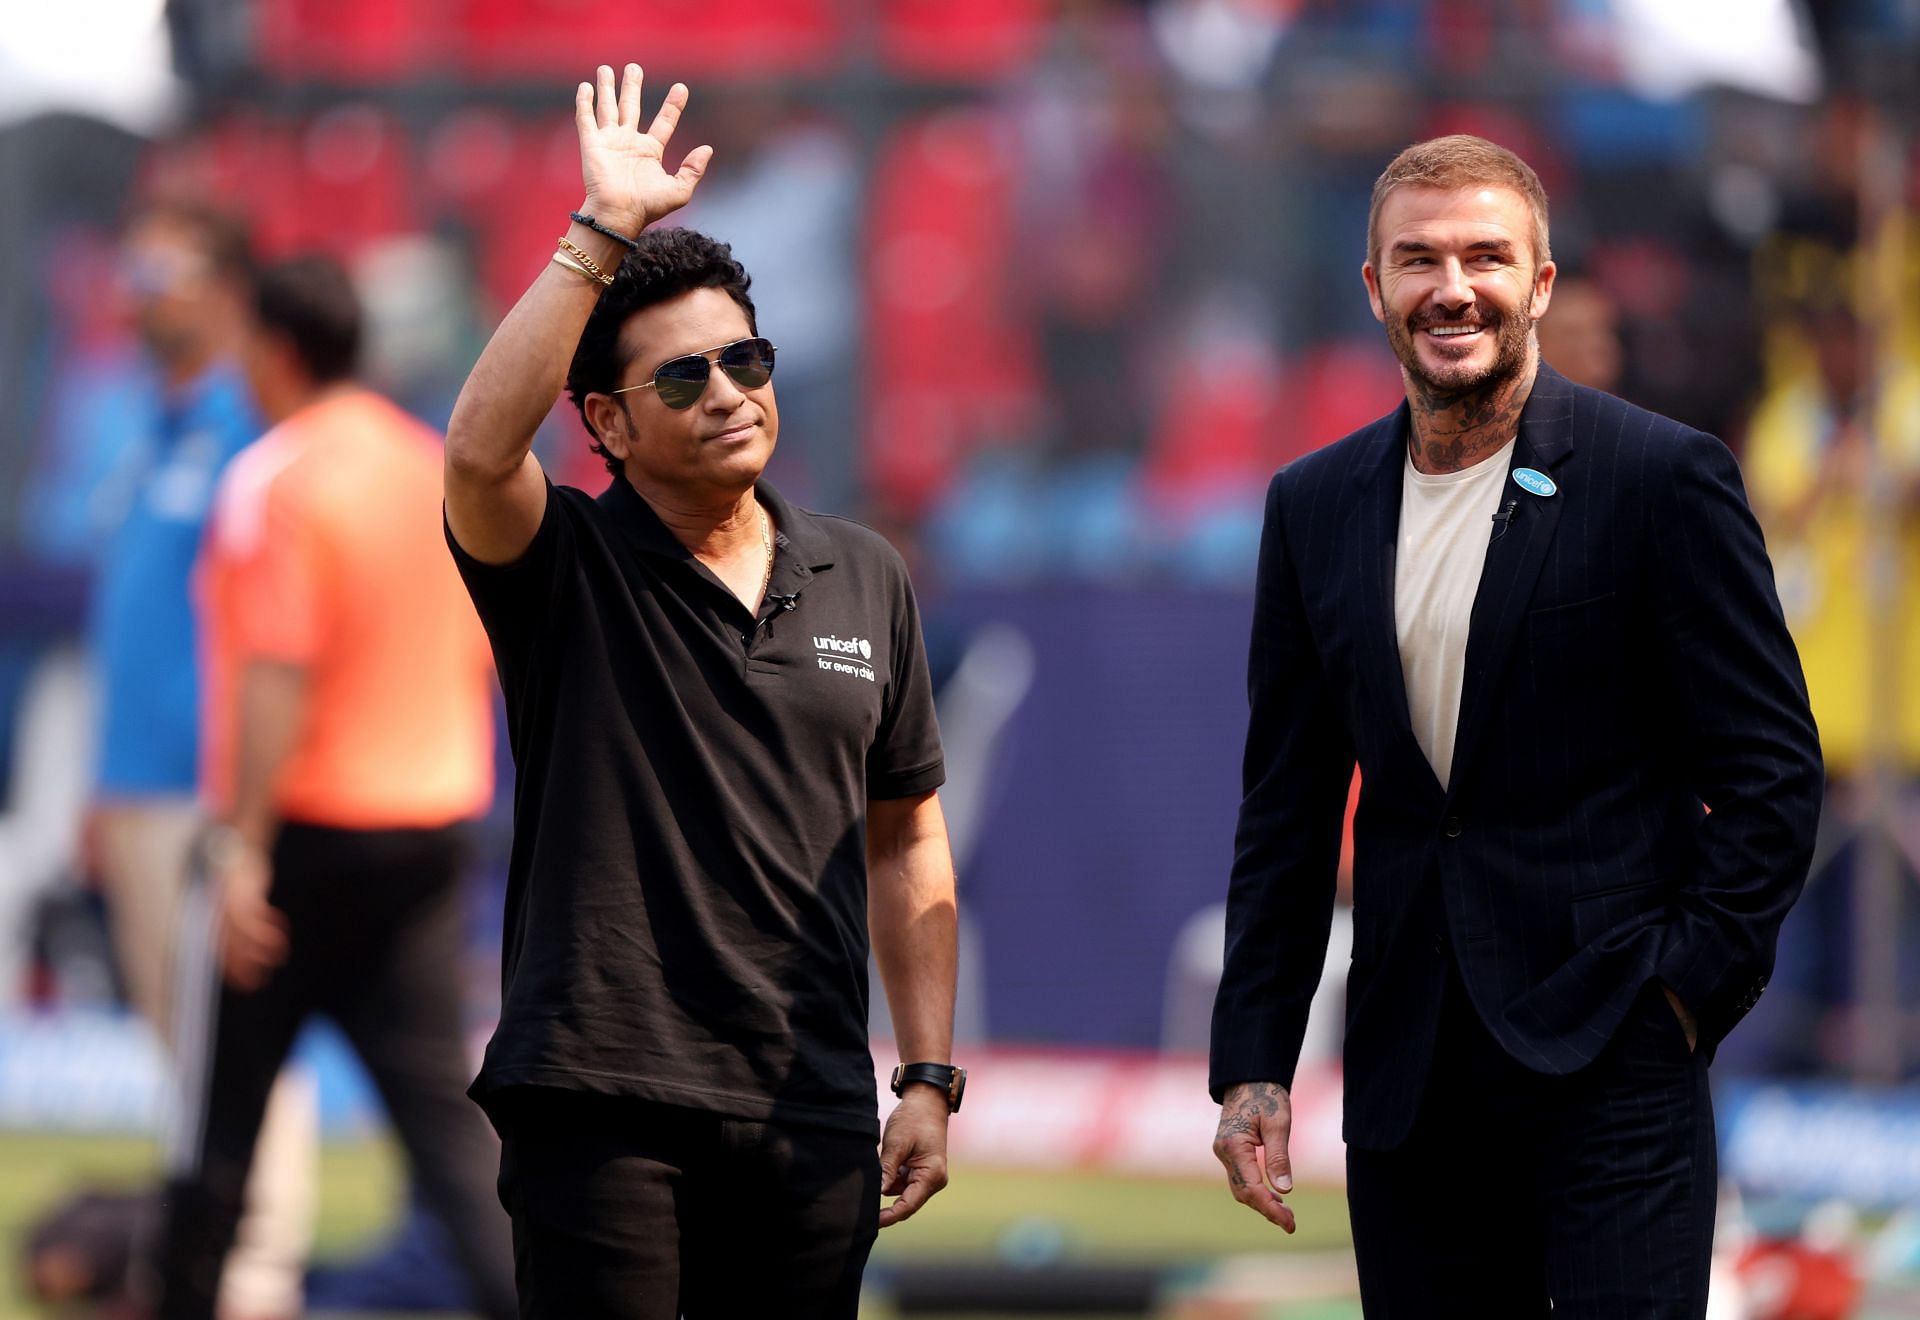 Sachin Tendulkar (left) is a legend of his game, as is David Beckham (right) in his - football.